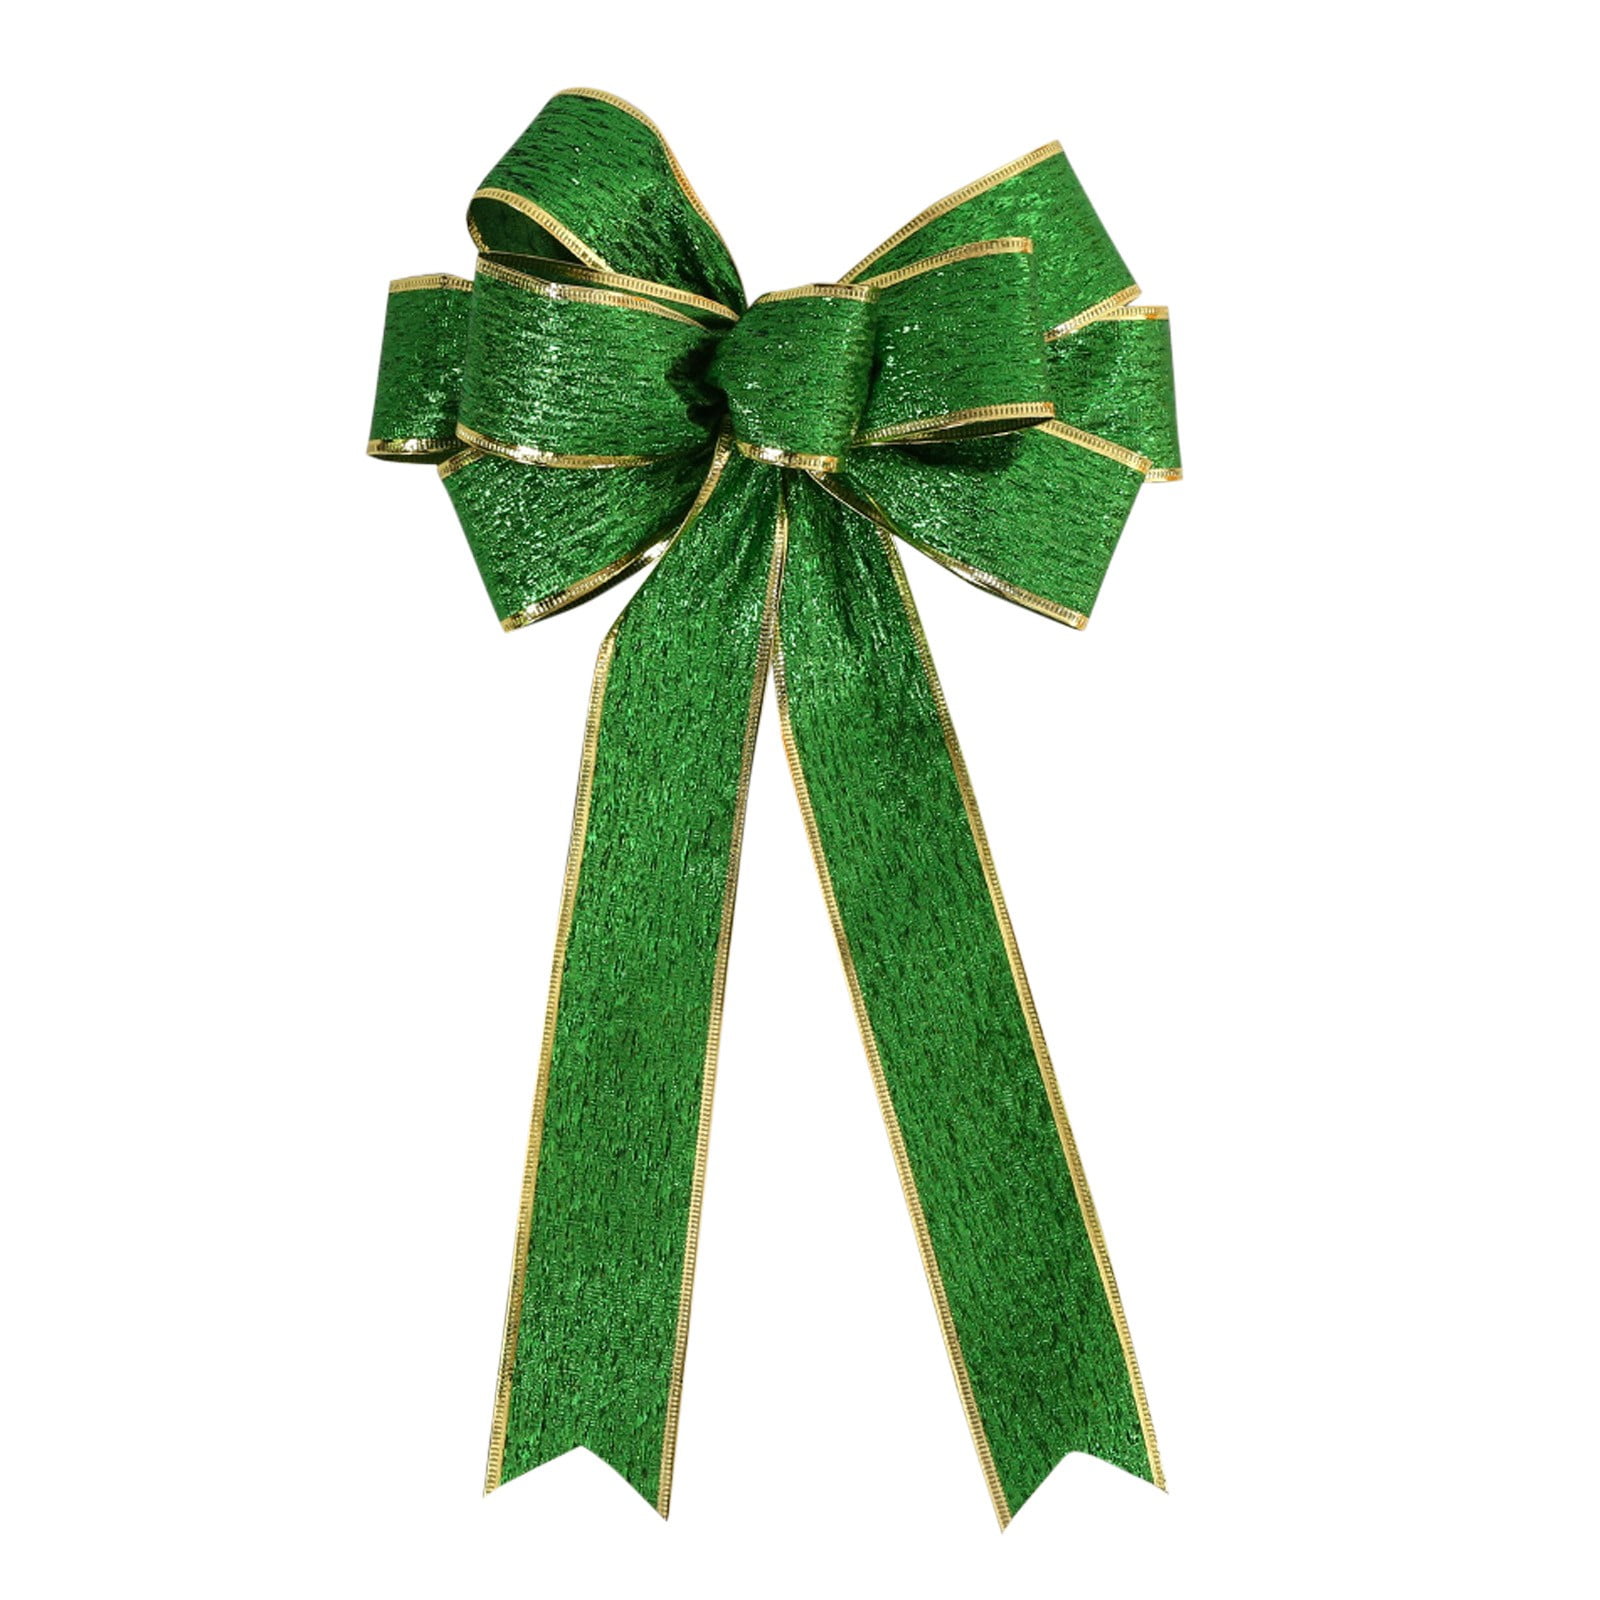 Dark Green Ribbon 5/8 Inch x 25 Yards, Forest Green Satin Ribbon for  Christmas Wreaths, Bows, Gift Wrapping, DIY Crafts, Sewing Projects, Bridal